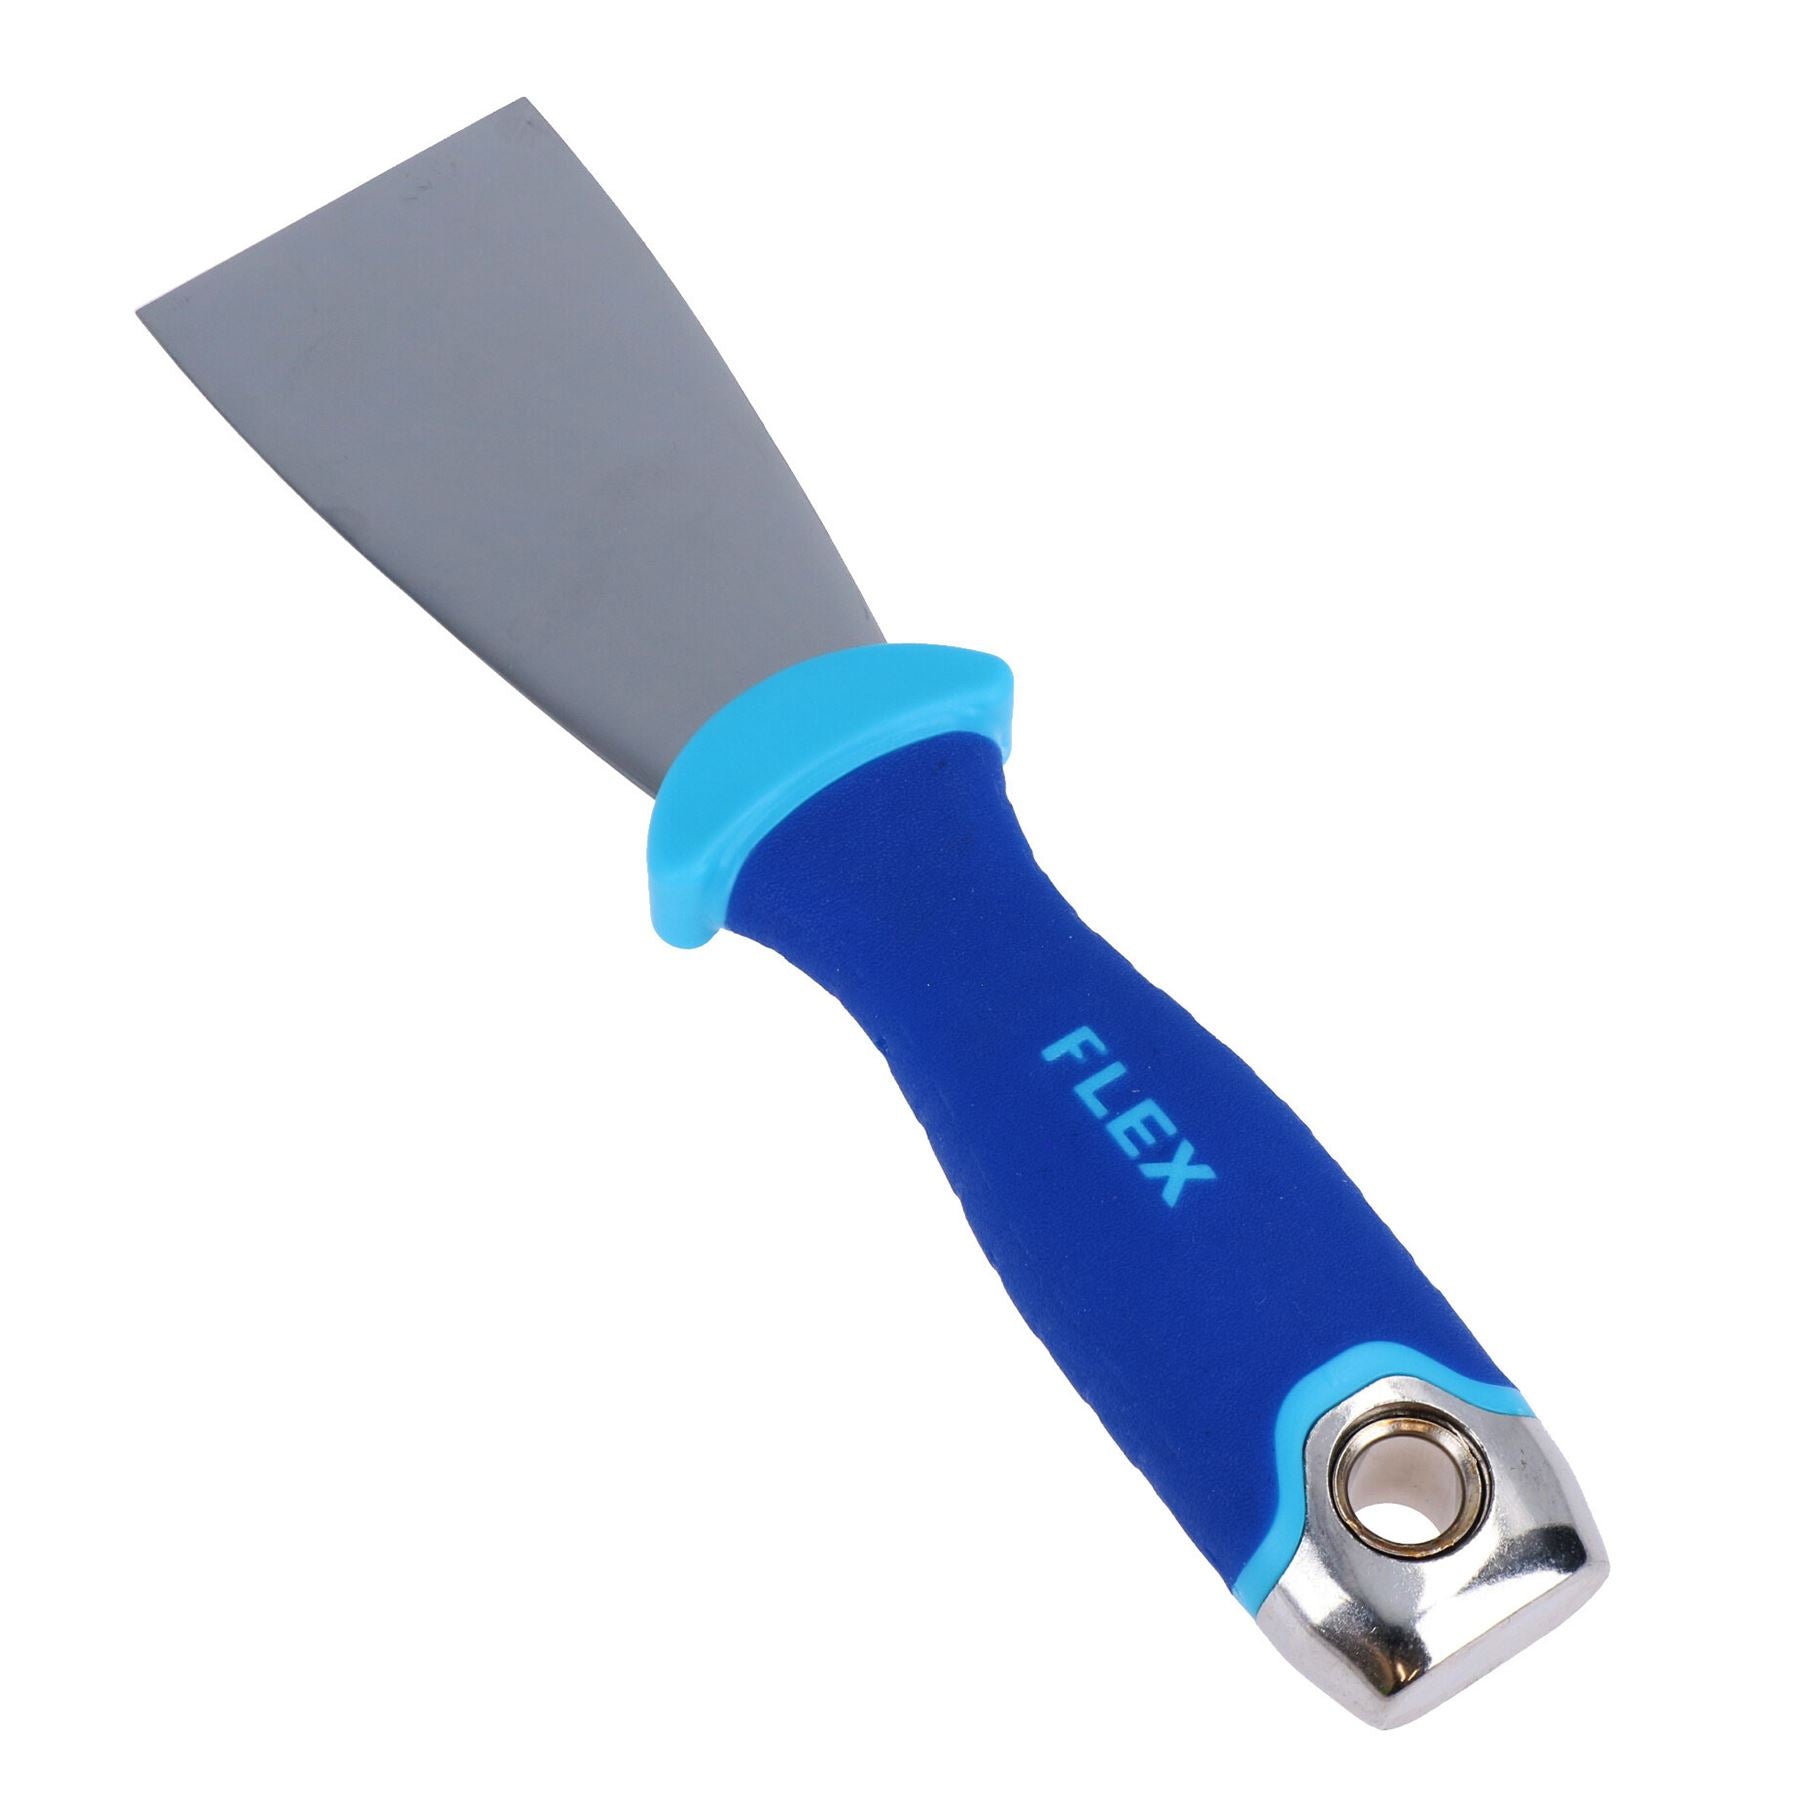 Decorators Decorating Filling Knife Scraper Stripping Putty Remover Applier